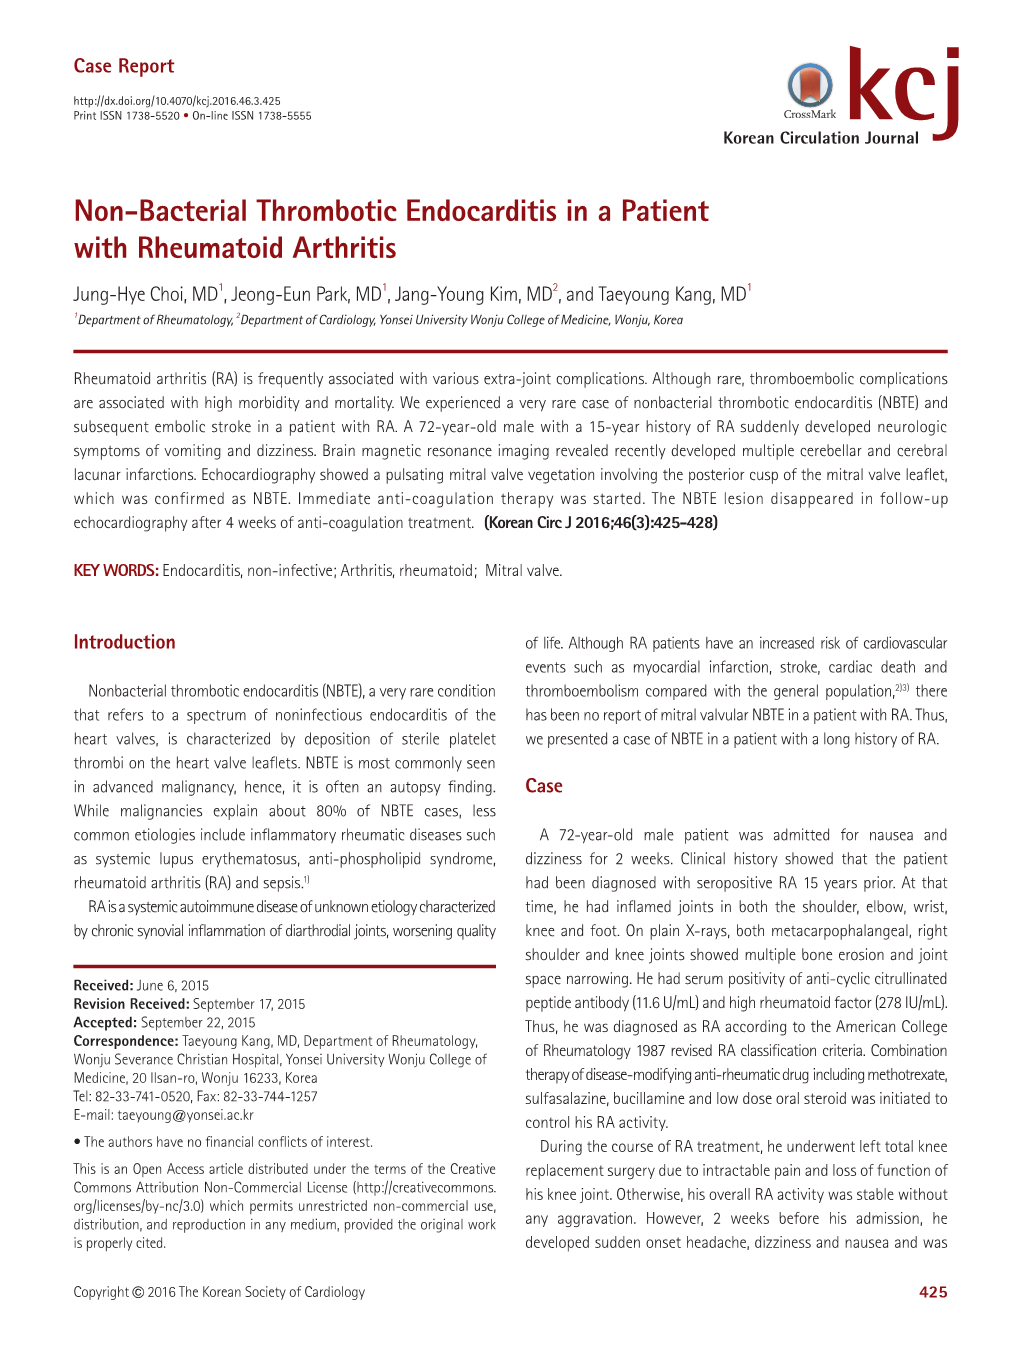 Non-Bacterial Thrombotic Endocarditis in a Patient With